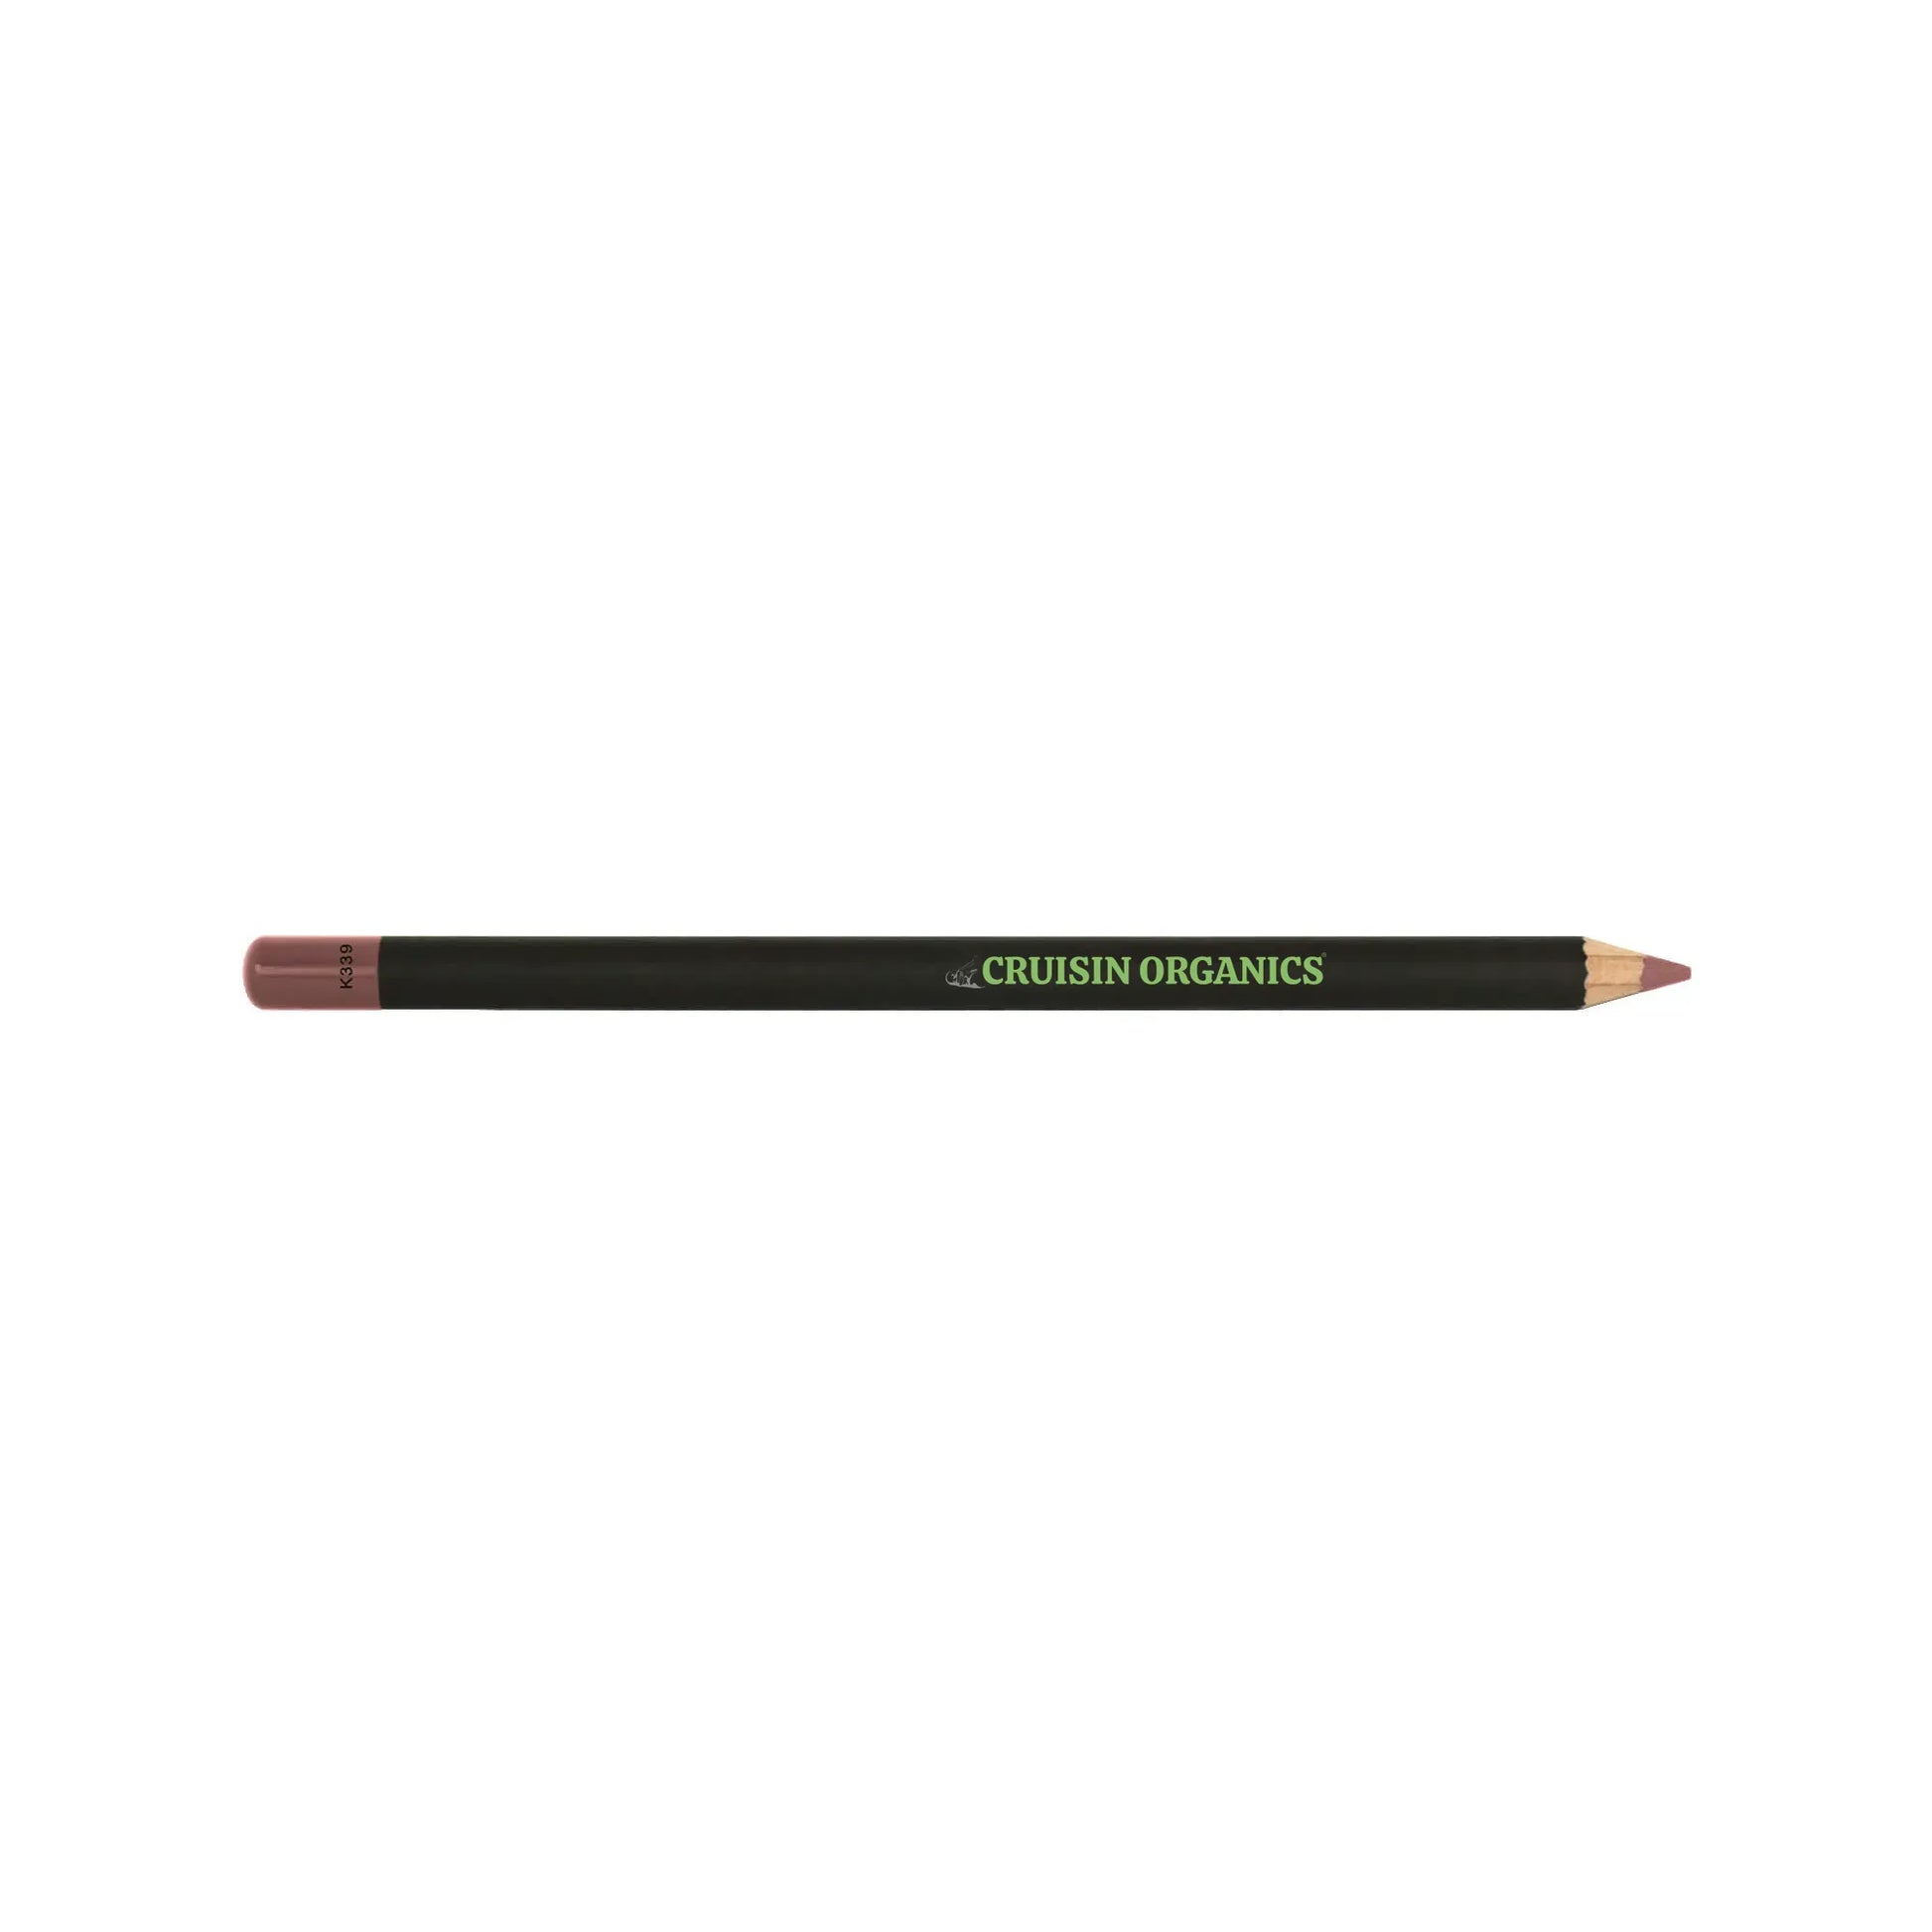 Roseate Lip Pencil by Cruisin Organics.  liking the hue of something that's kind of dusty pinkish purple. "the pink radiance of daybreak."  Rosaceous pencil for a lovely lip color and chromatic lips with a rose tint. neatly enclosed in a little pen for travel.